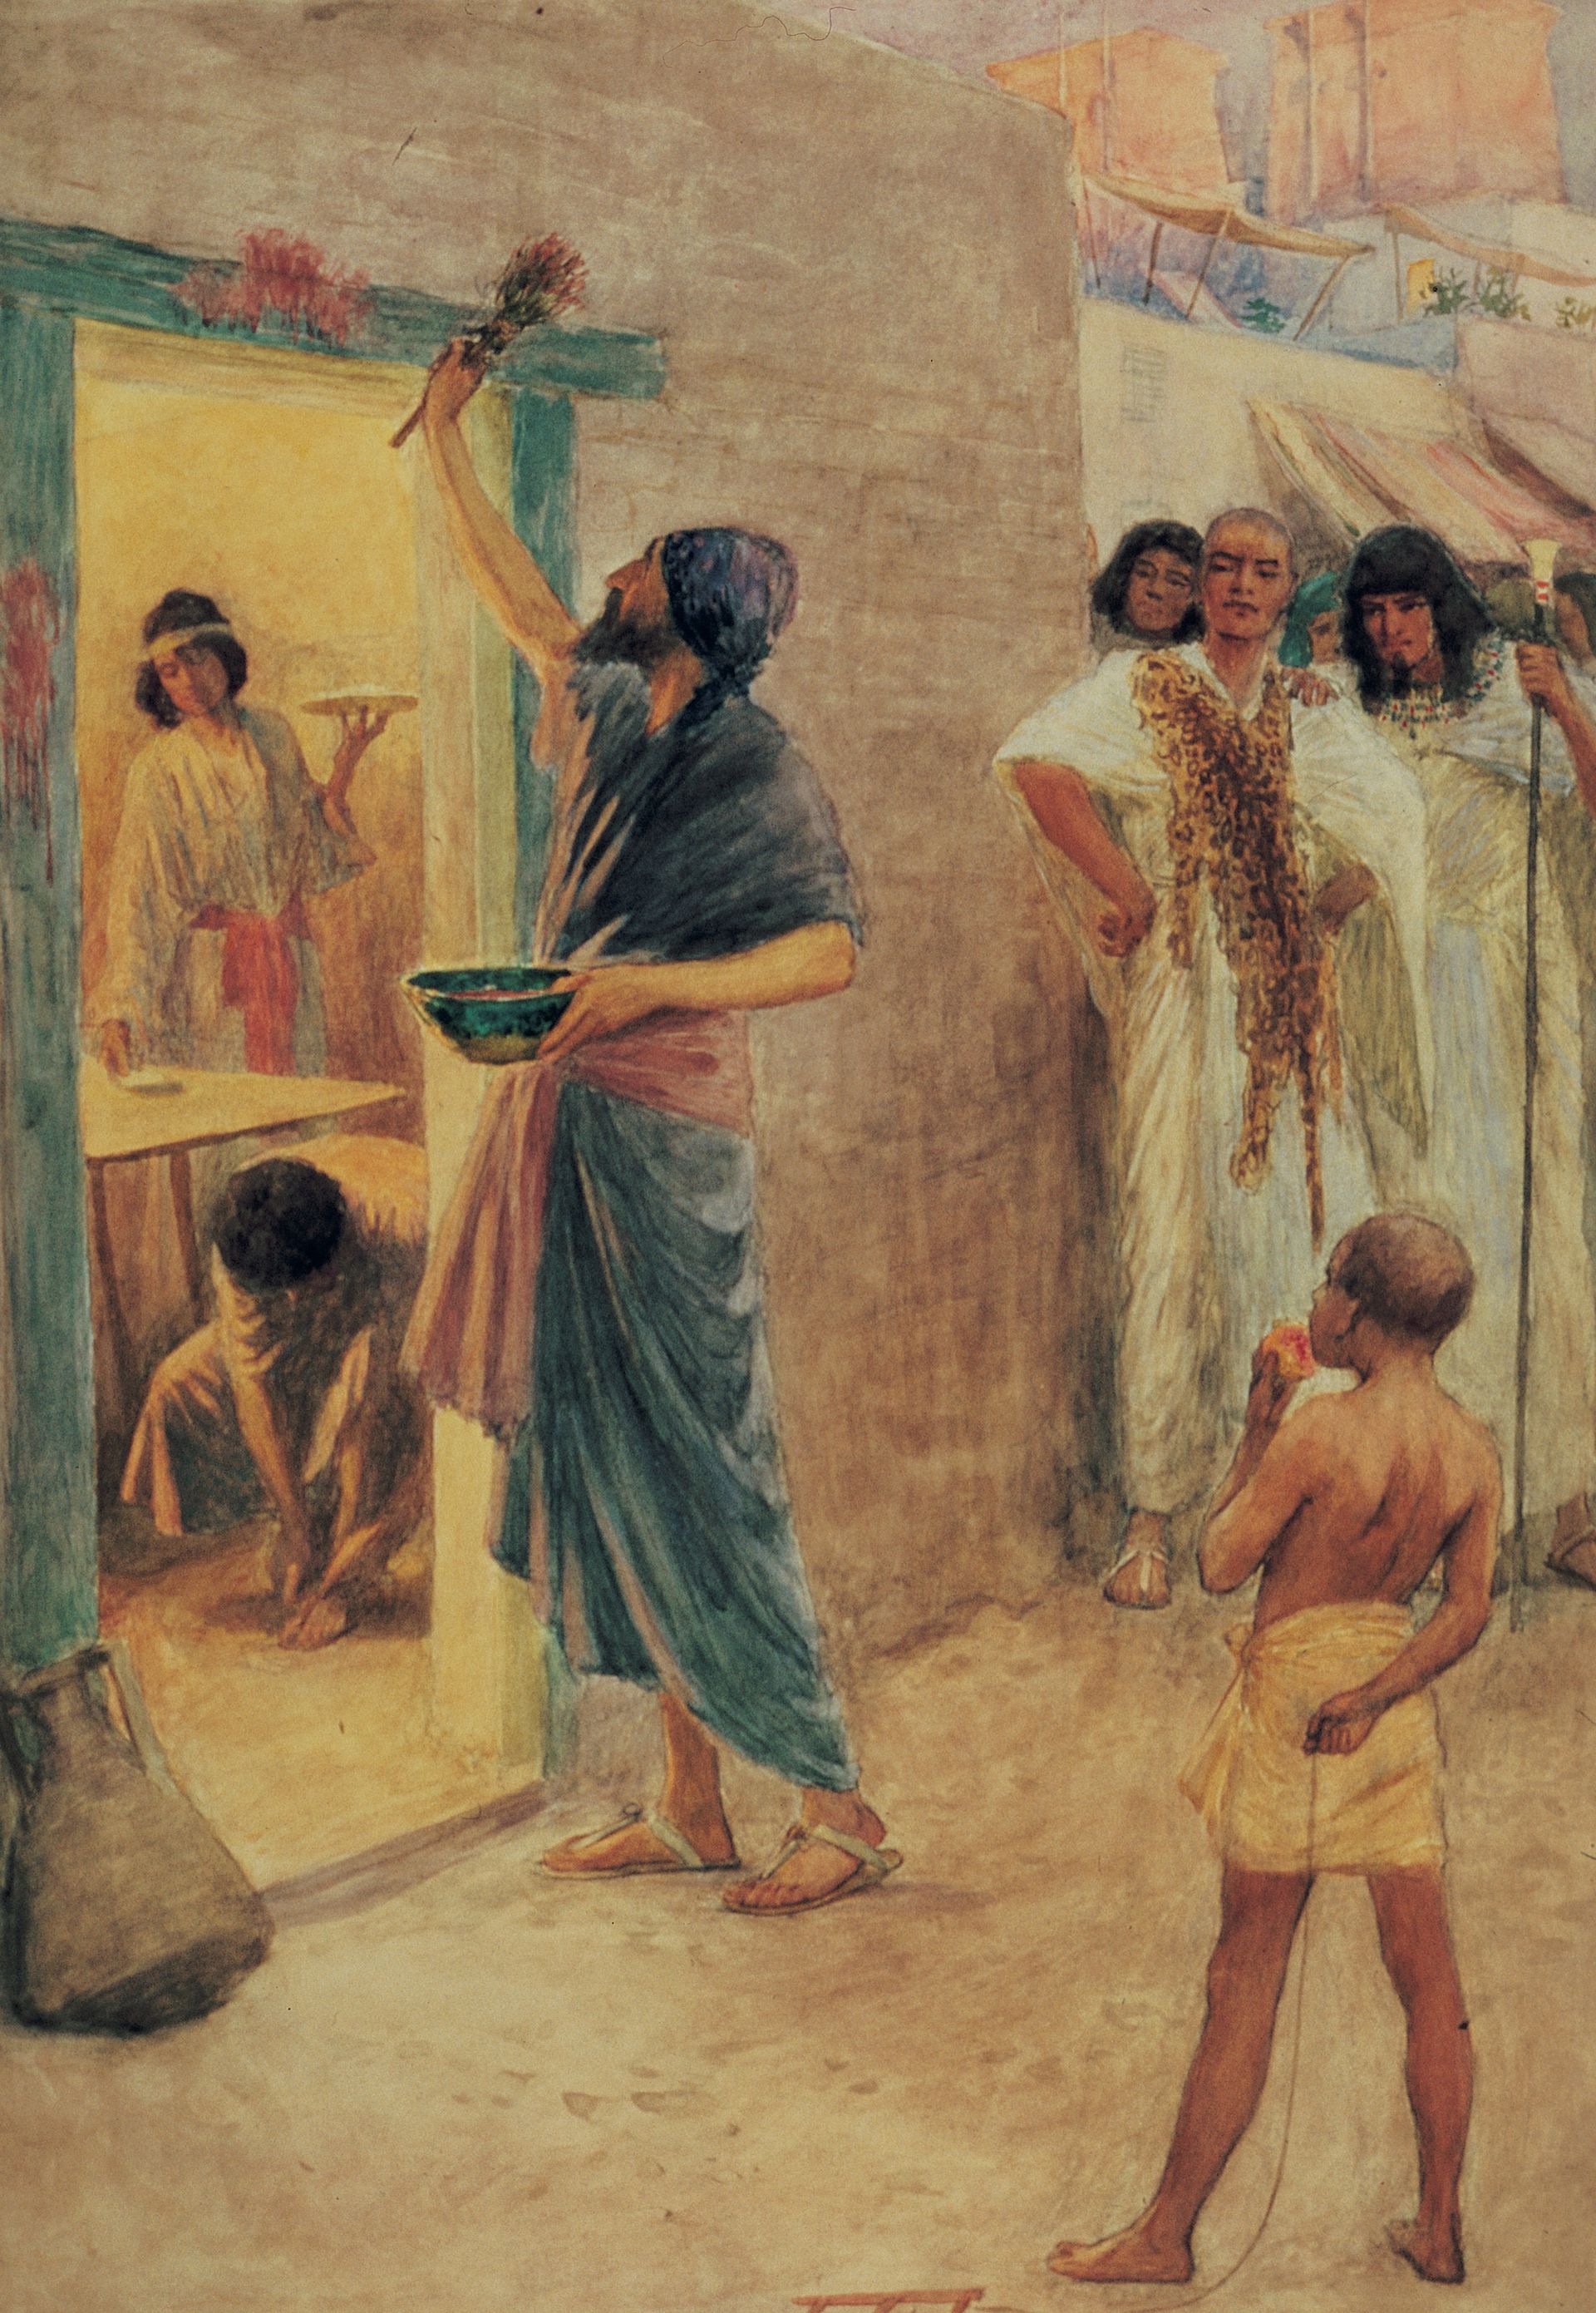 The Passover, by W. H. Margetson